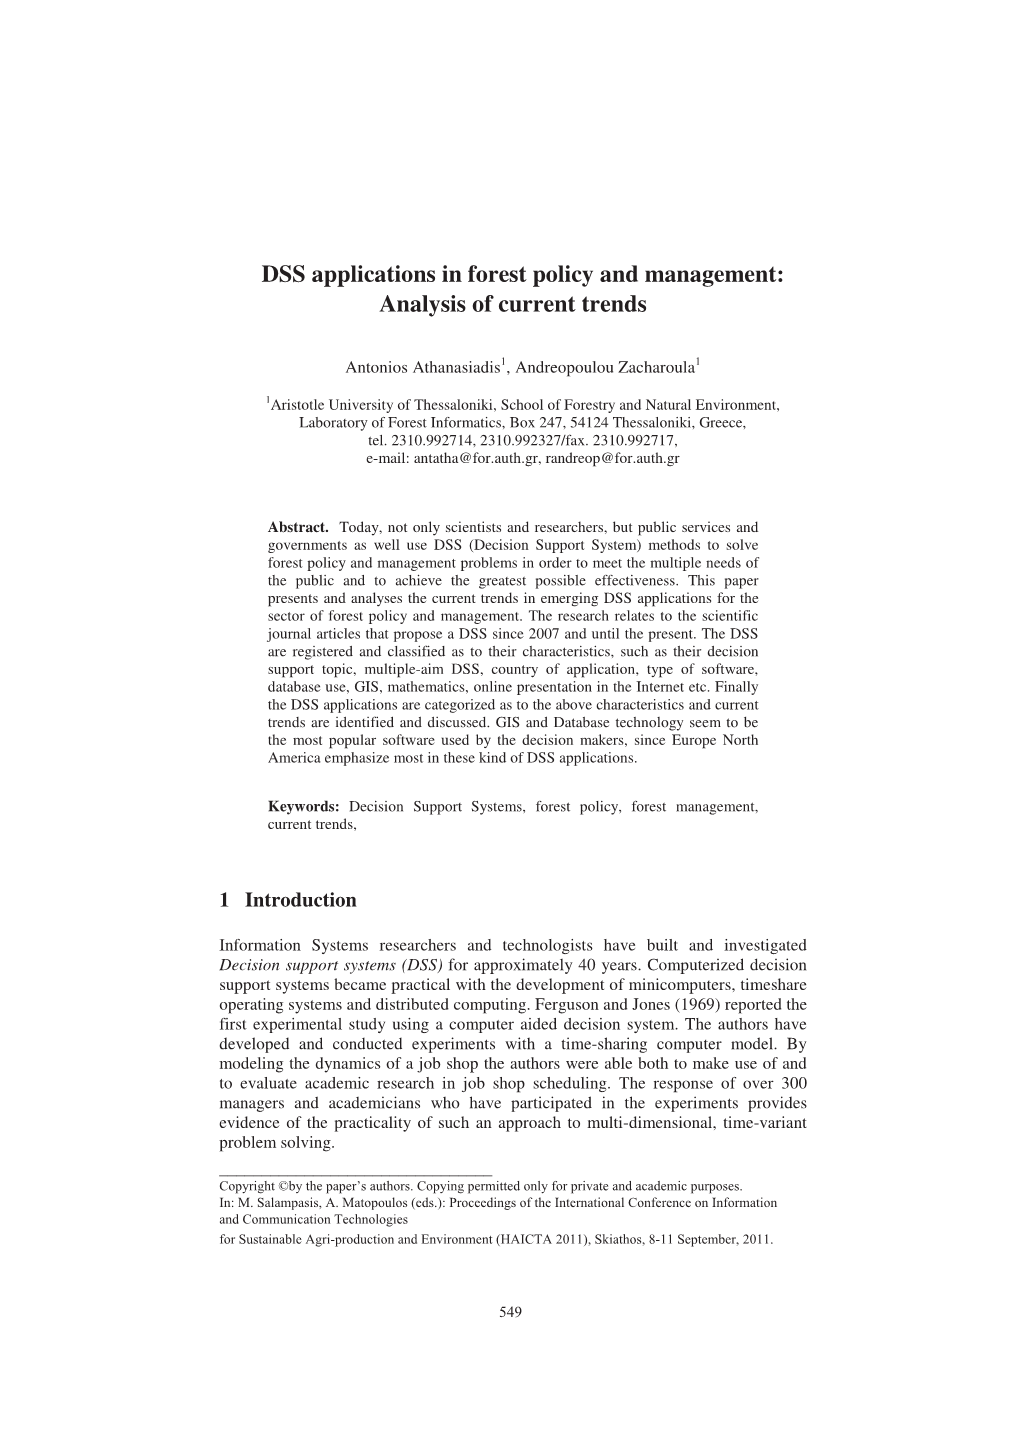 DSS Applications in Forest Policy and Management: Analysis of Current Trends